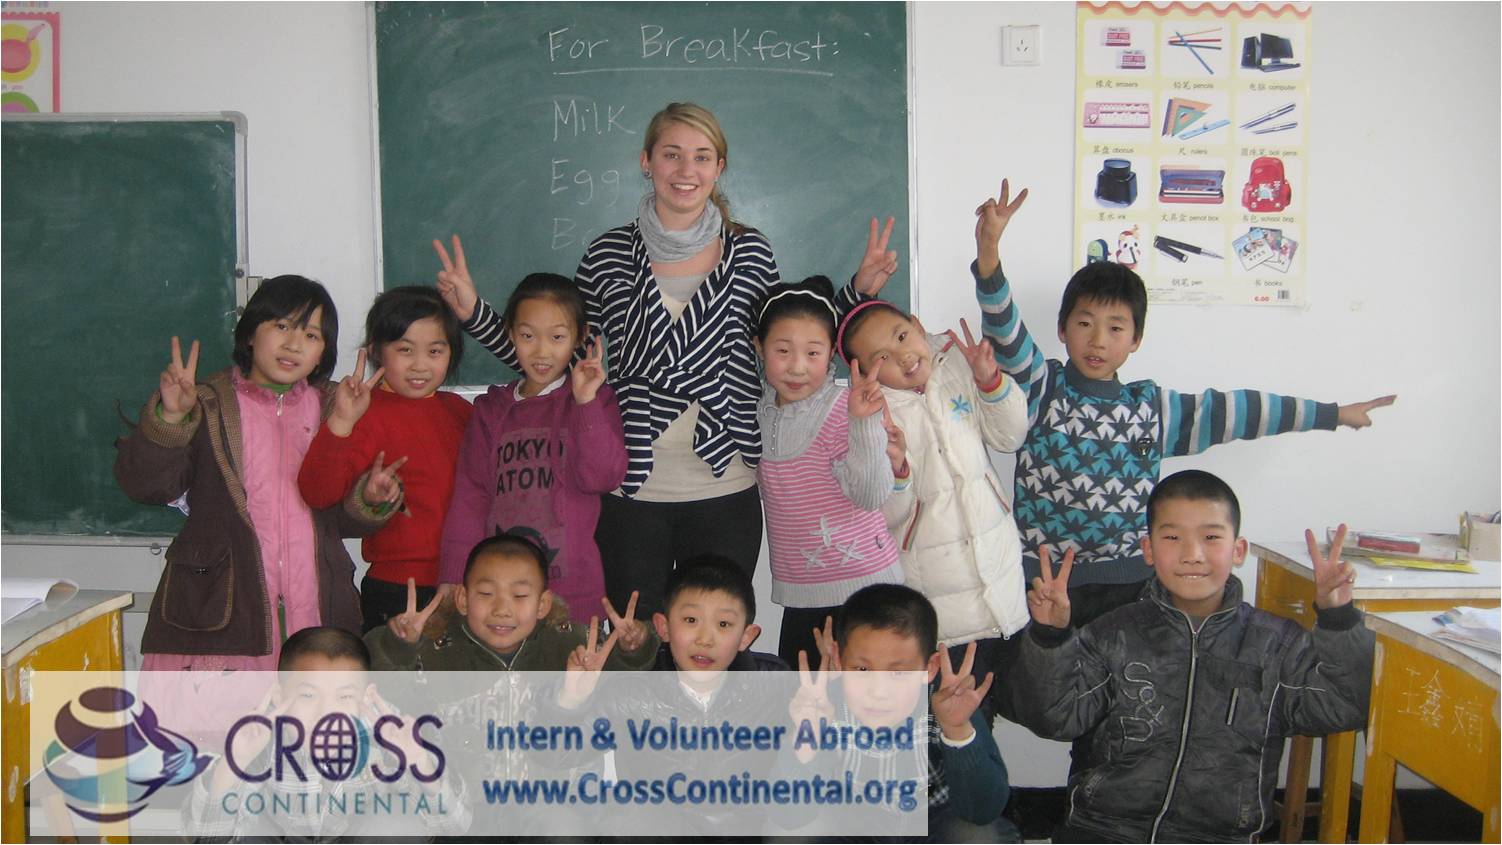 Affordable Volunteer Abroad, Intern Abroad, Cultural Education, Language Immersion Programs